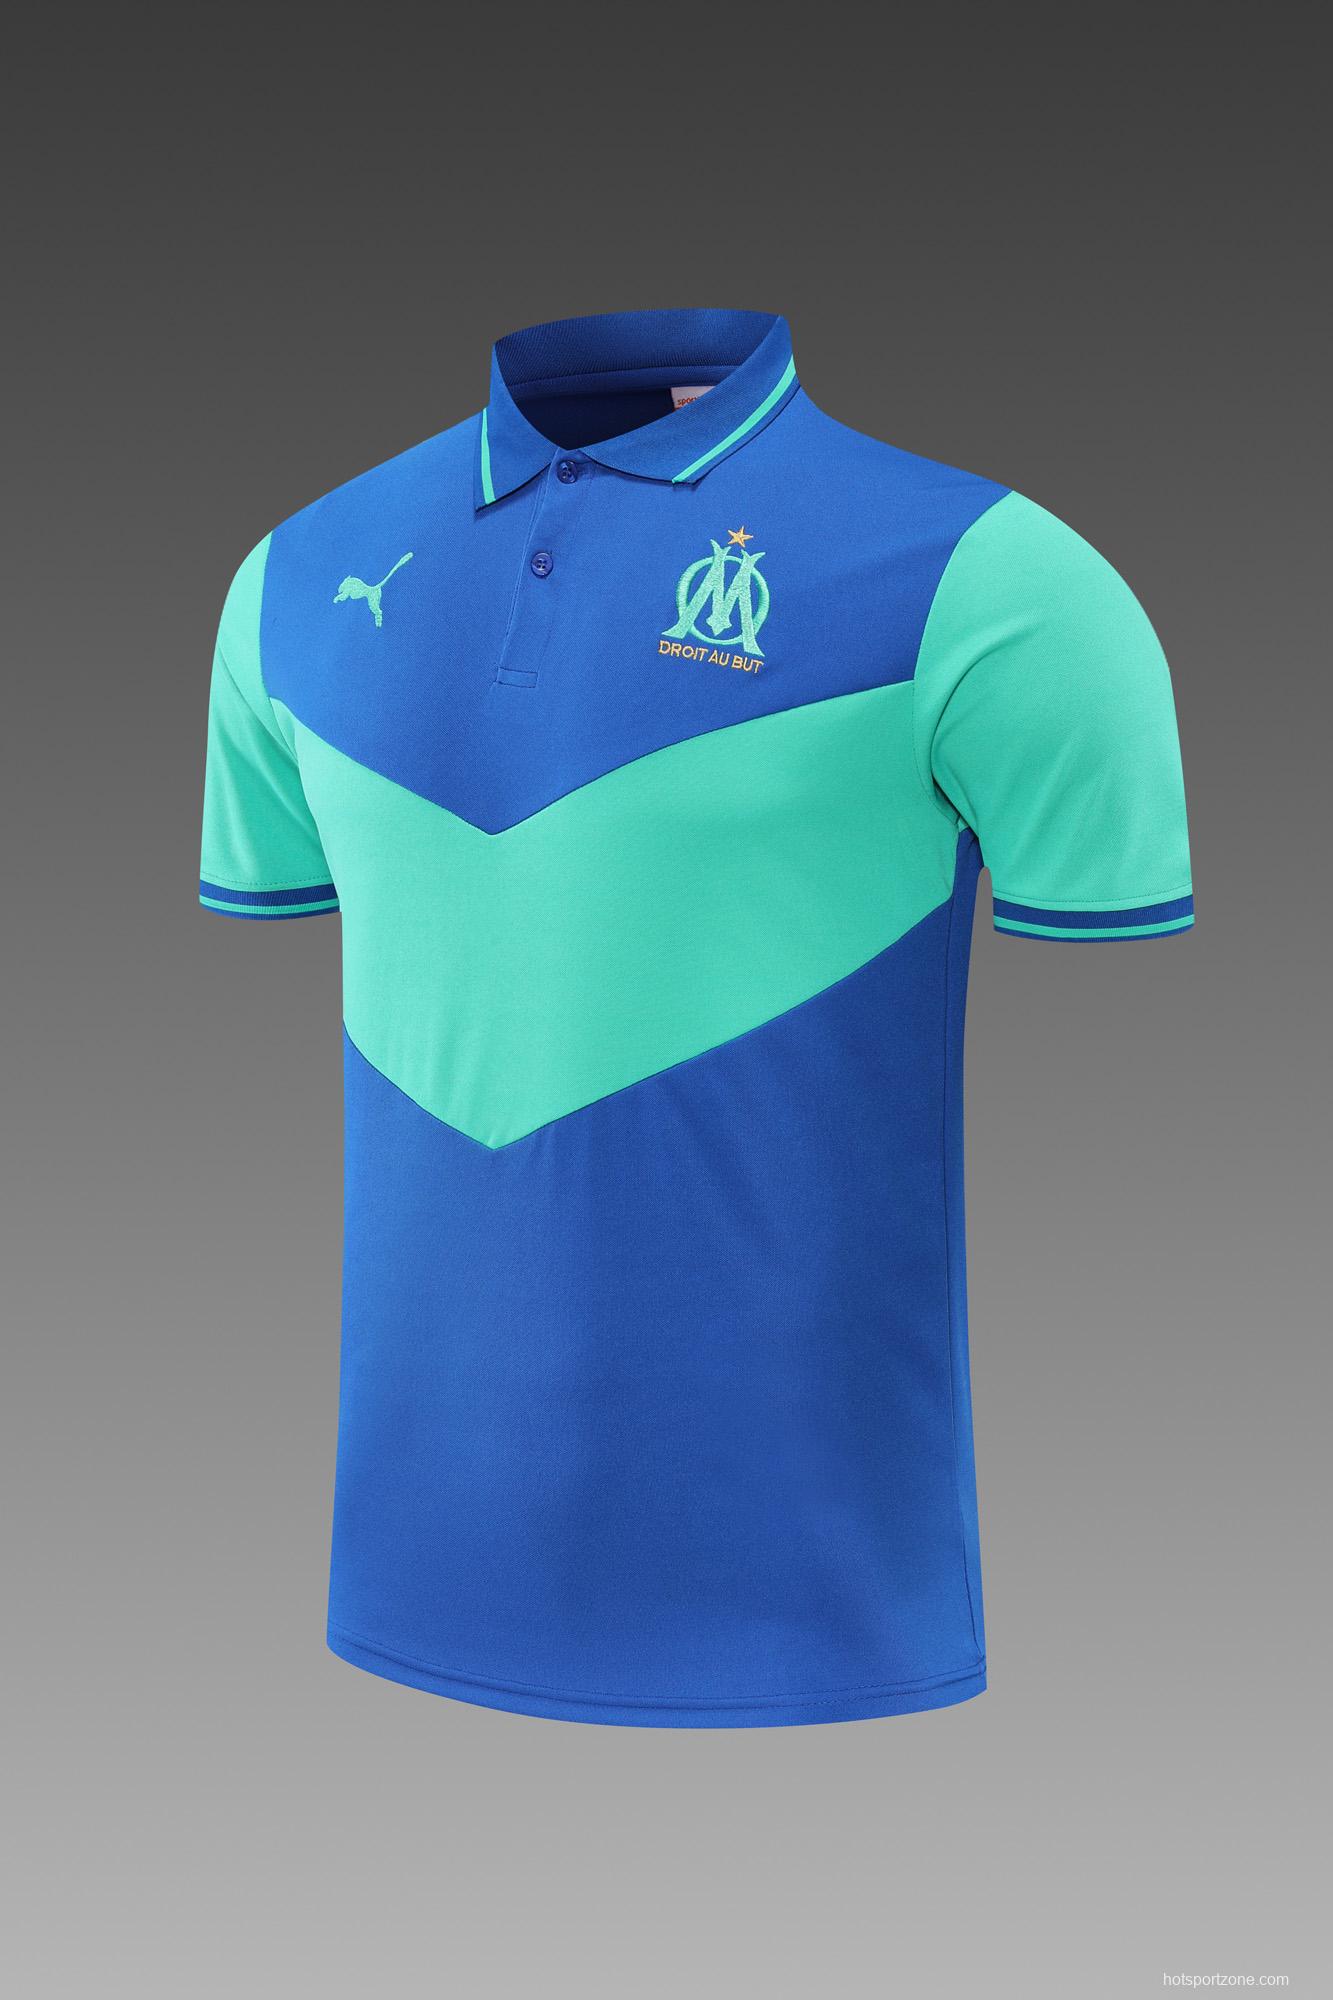 Olympique de Marseille POLO kit blue-green (not sold separately)